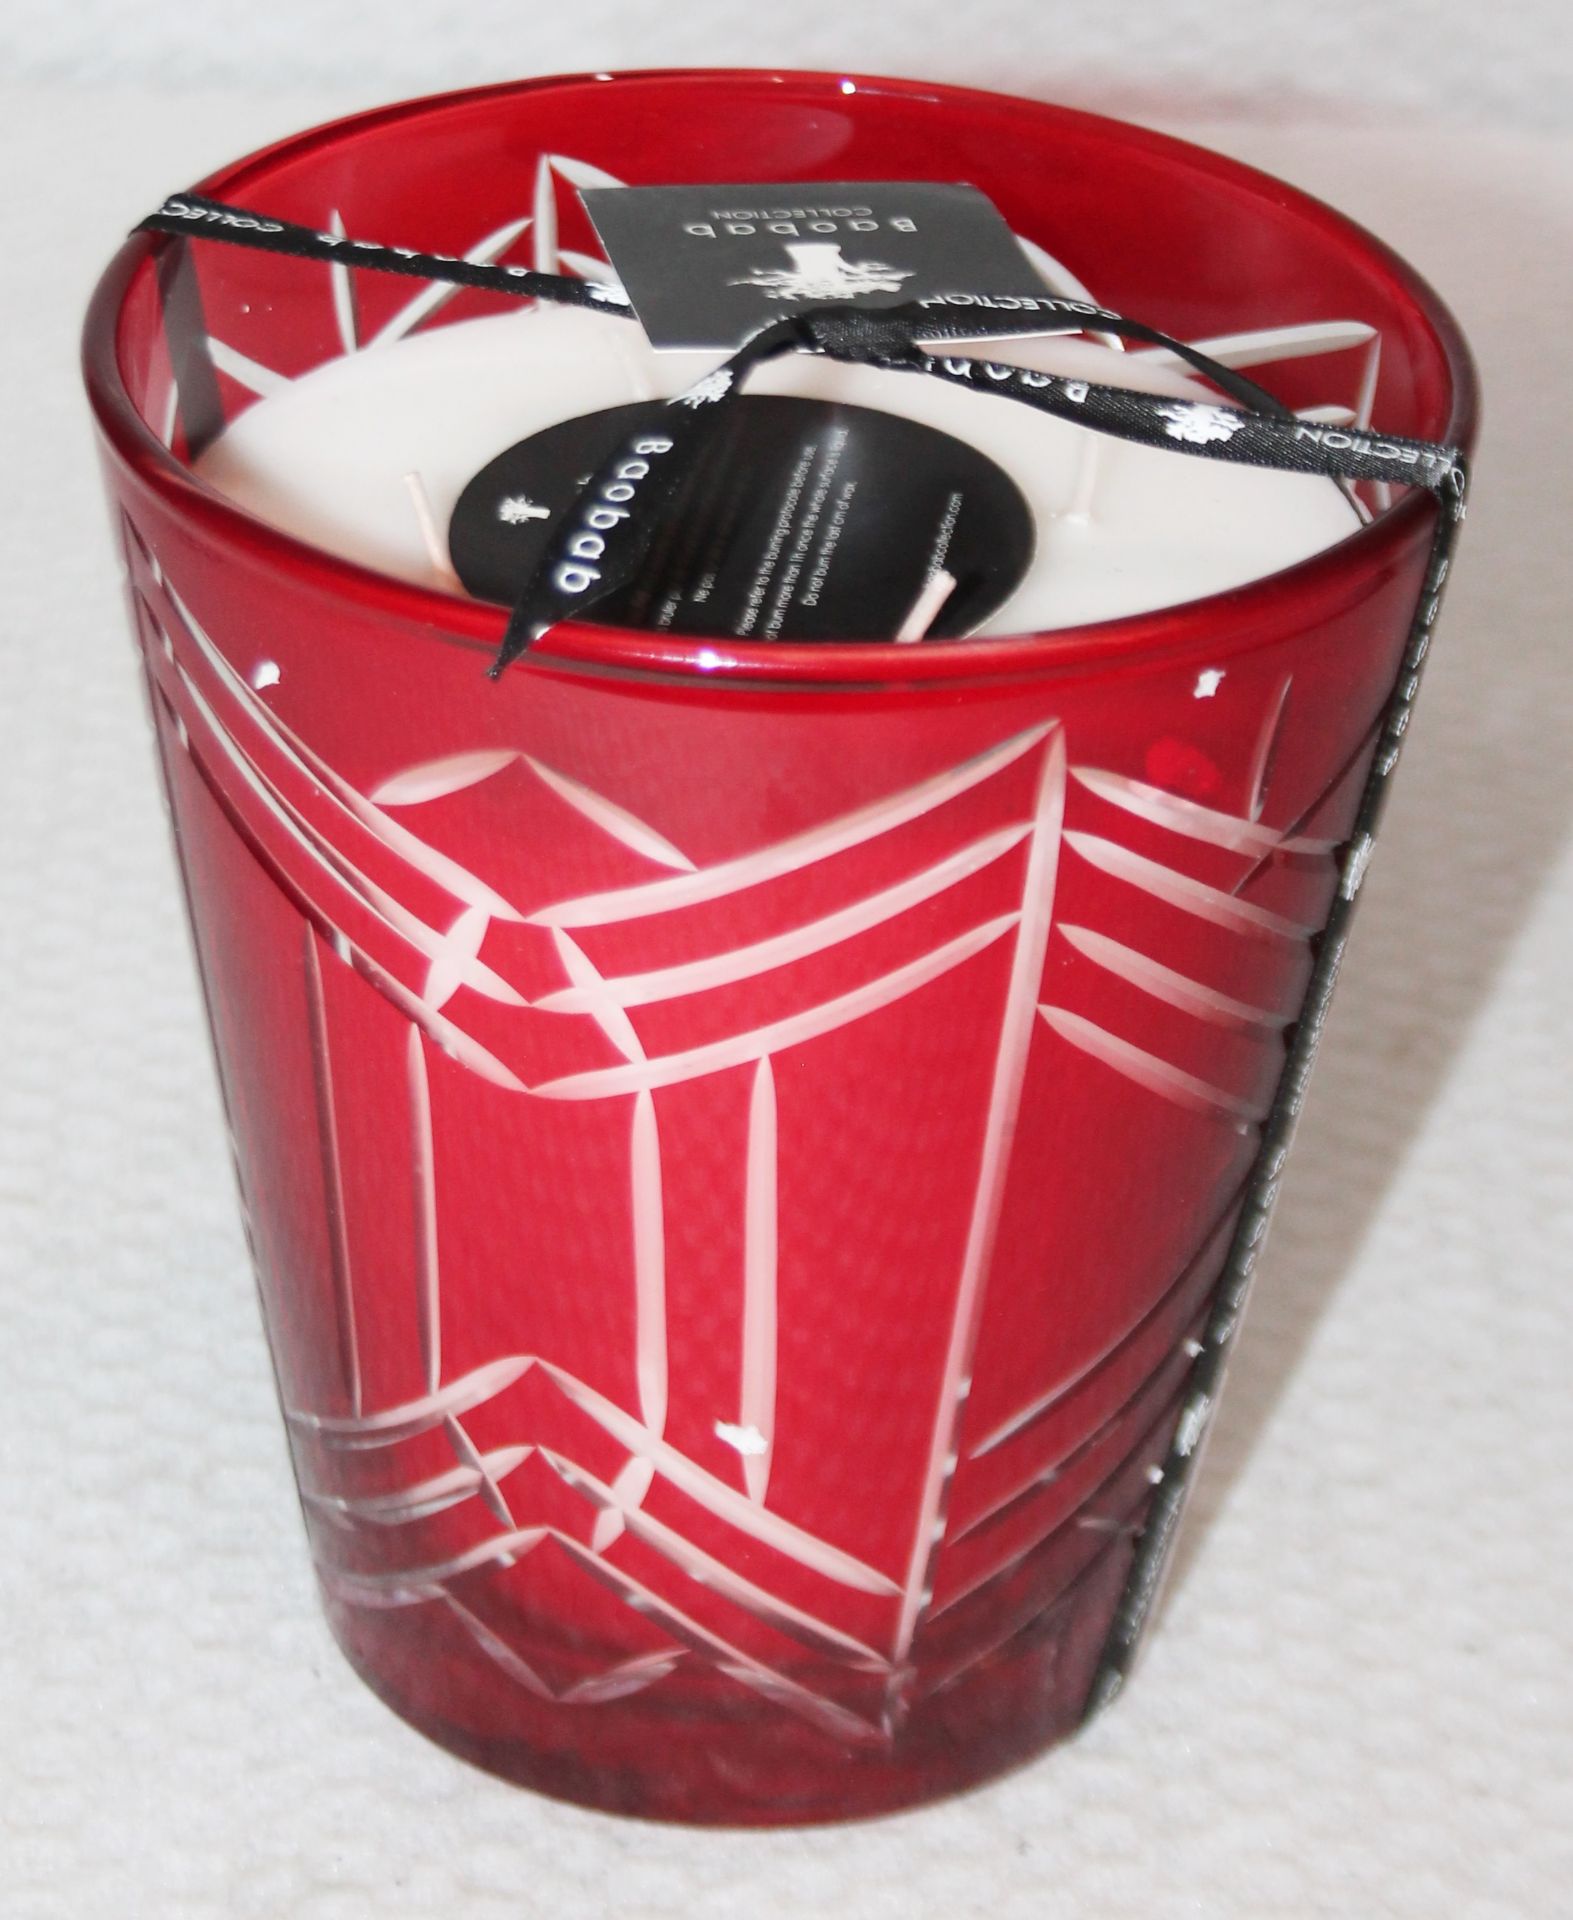 1 x BAOBAB COLLECTION High Society 'Louise' Luxury Candle In A Hand-Engraved Red Glass Jar - - Image 4 of 9